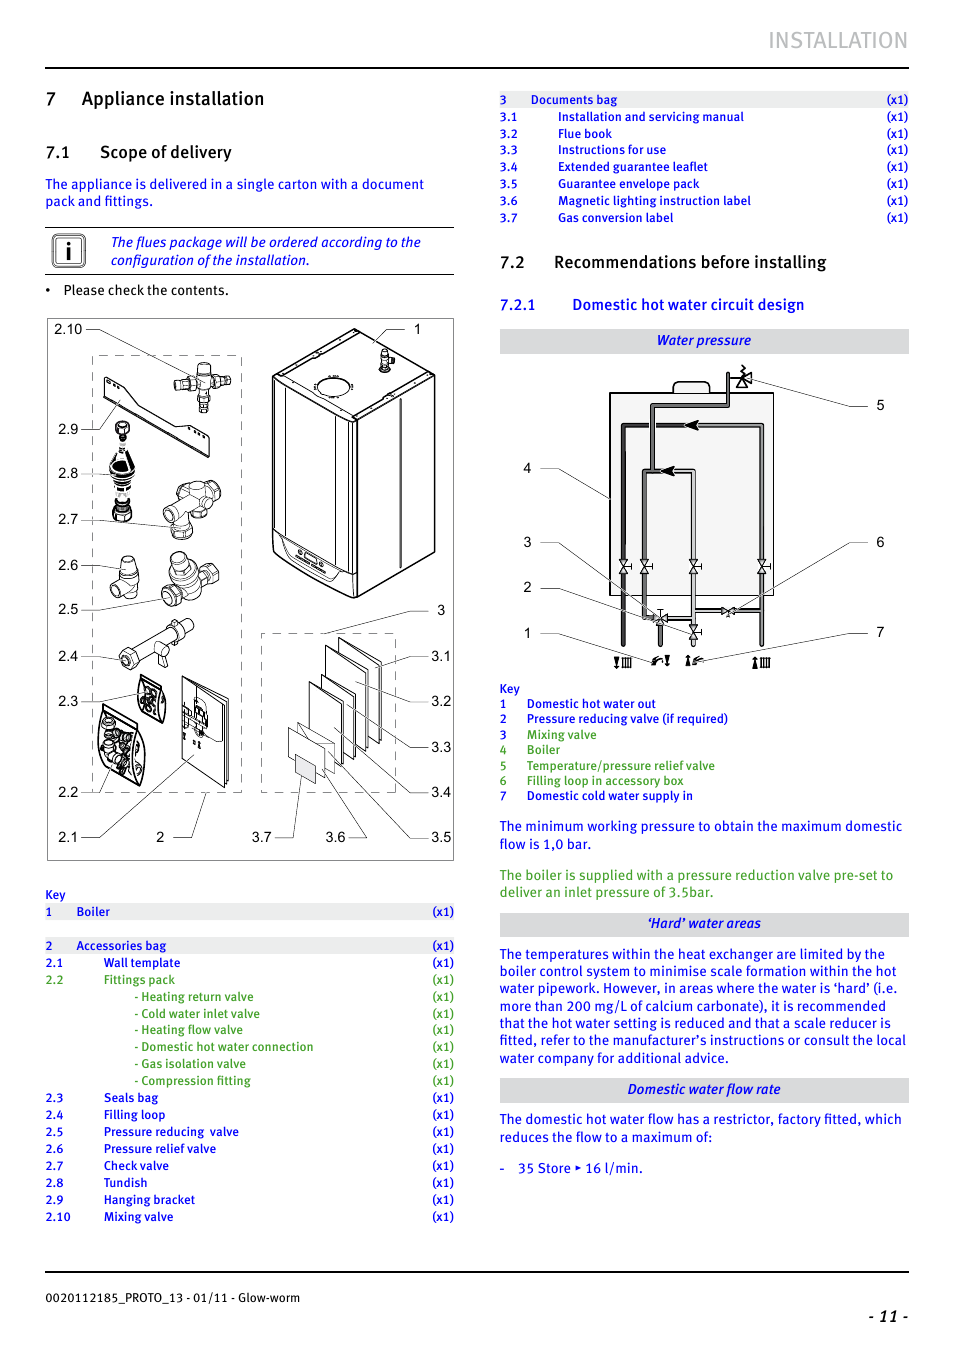 Installation, 7 appliance installation, 1 scope of delivery | 2 recommendations before installing | Glow-worm Ultracom2 35 Store User Manual | Page 13 / 68